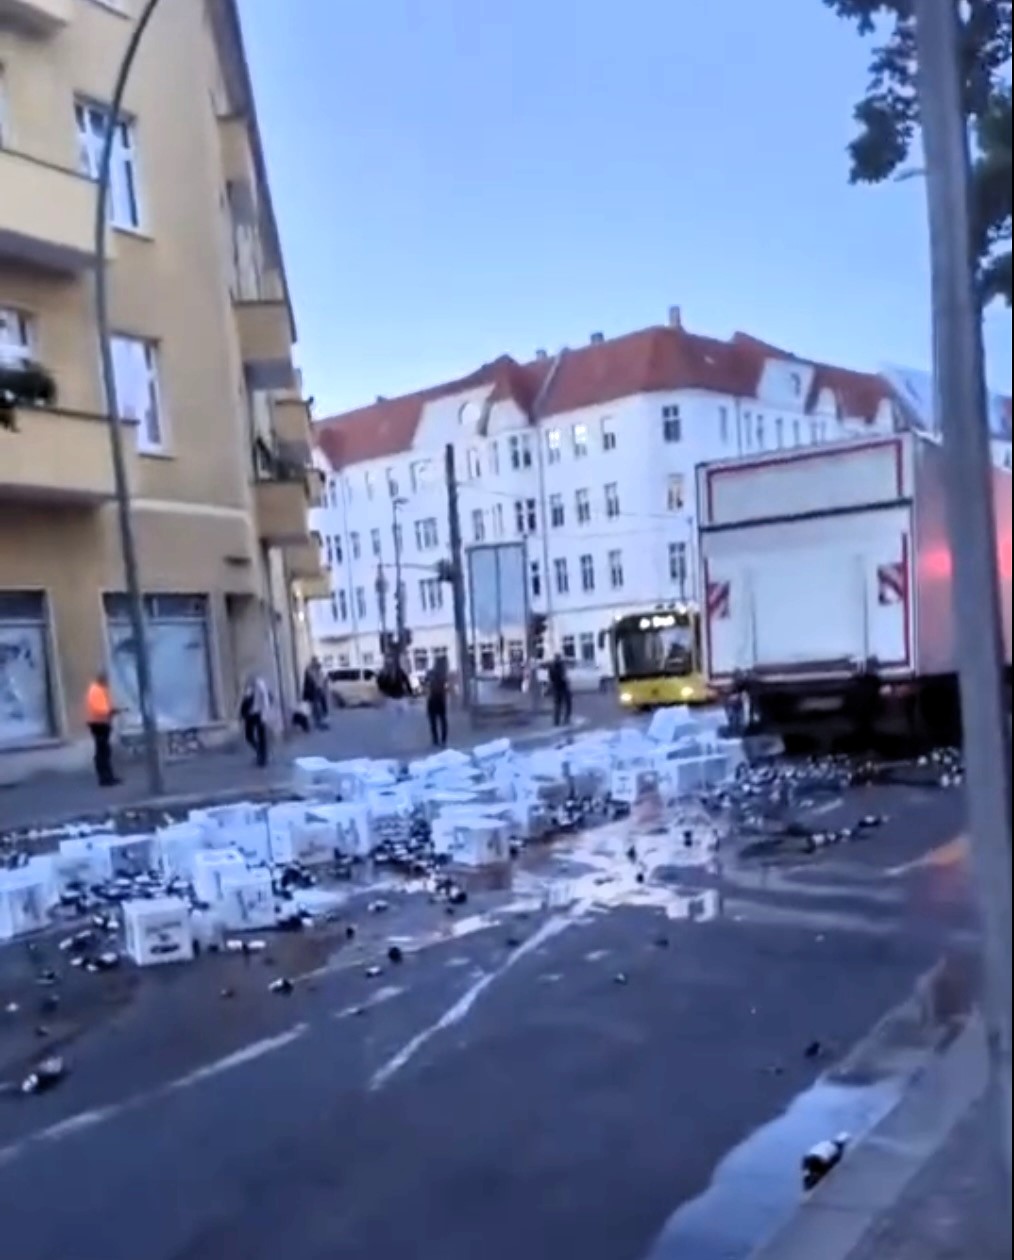 Beer shortage fears loom ahead of Euro 2024 as a truck accident in Berlin spills loads of beer, leaving footy fans distressed just before the tournament kickoff.